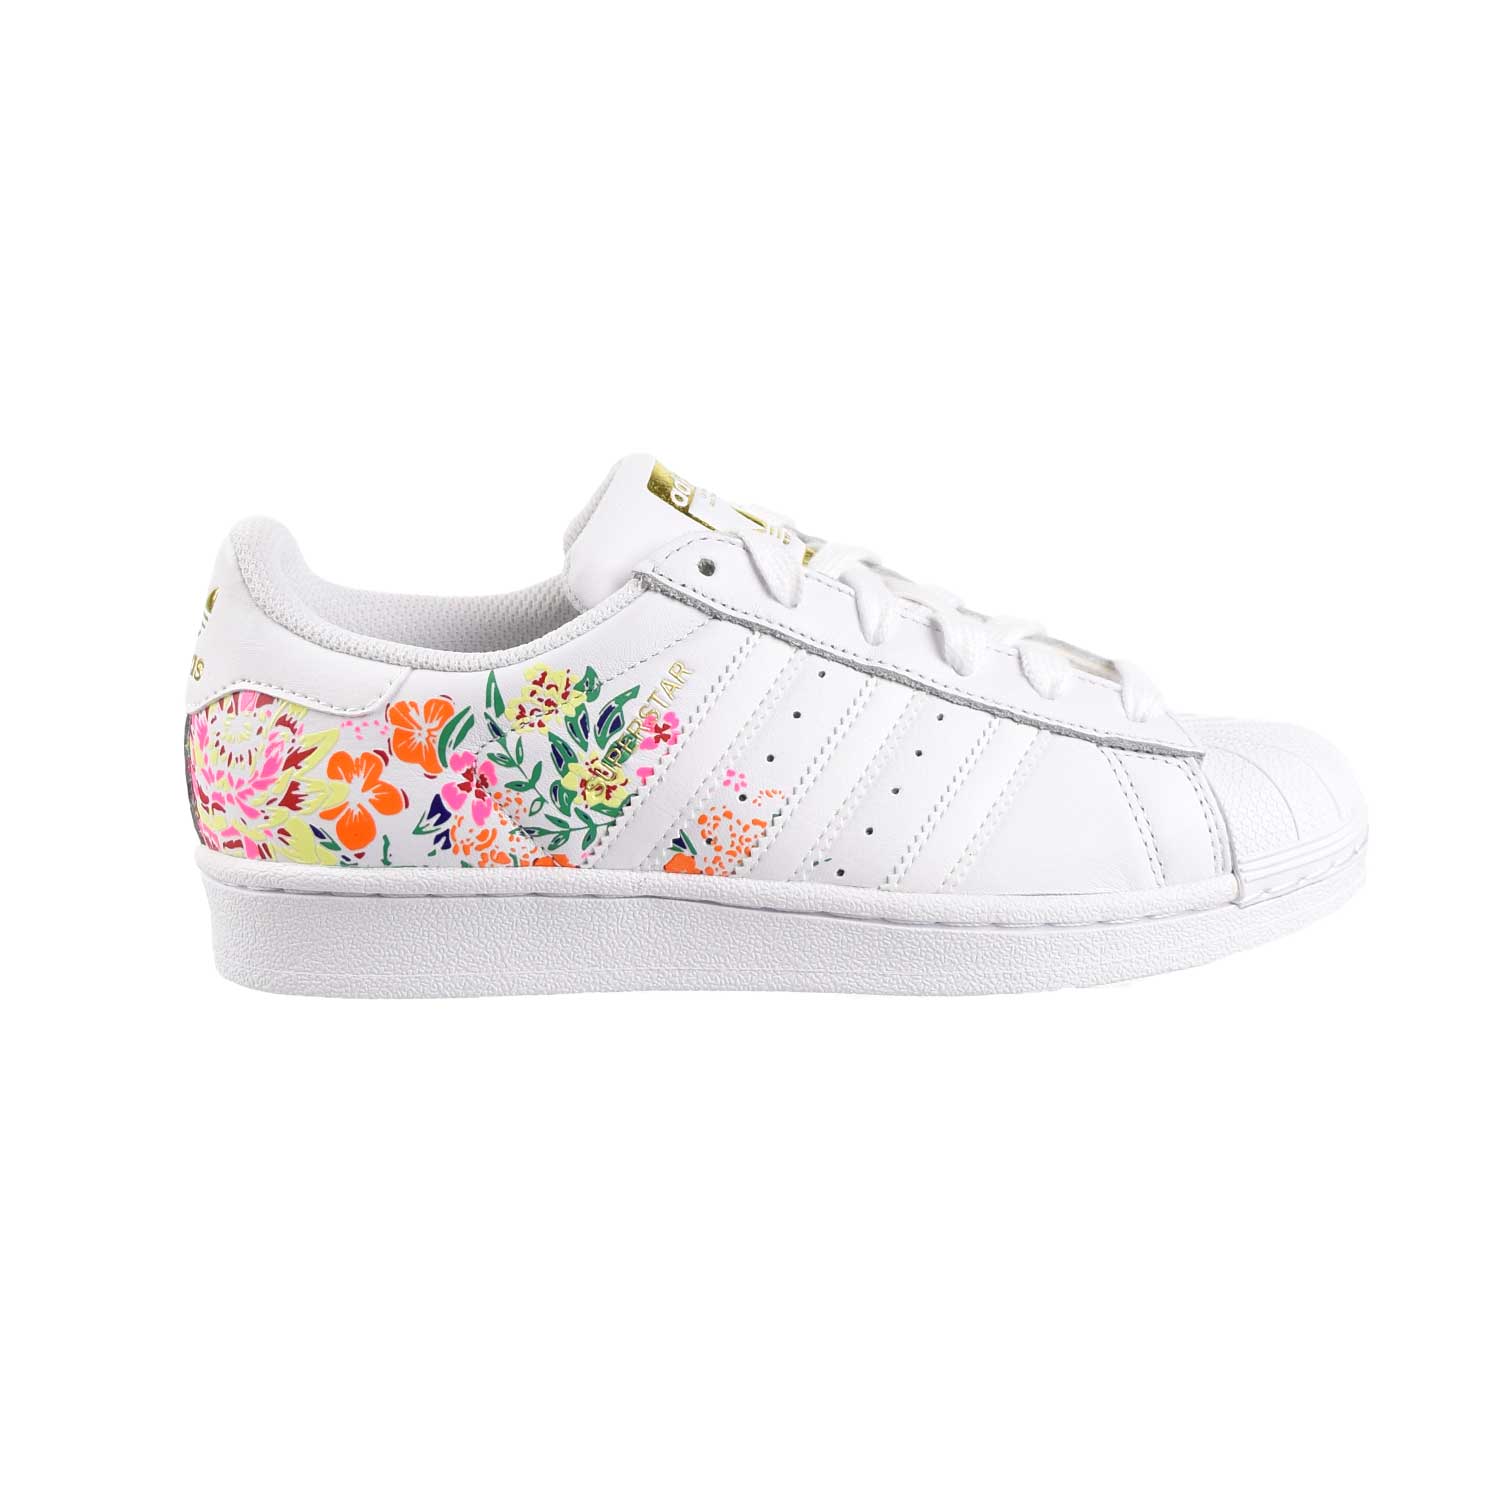 Adidas Superstar Womens Shoes Floral 